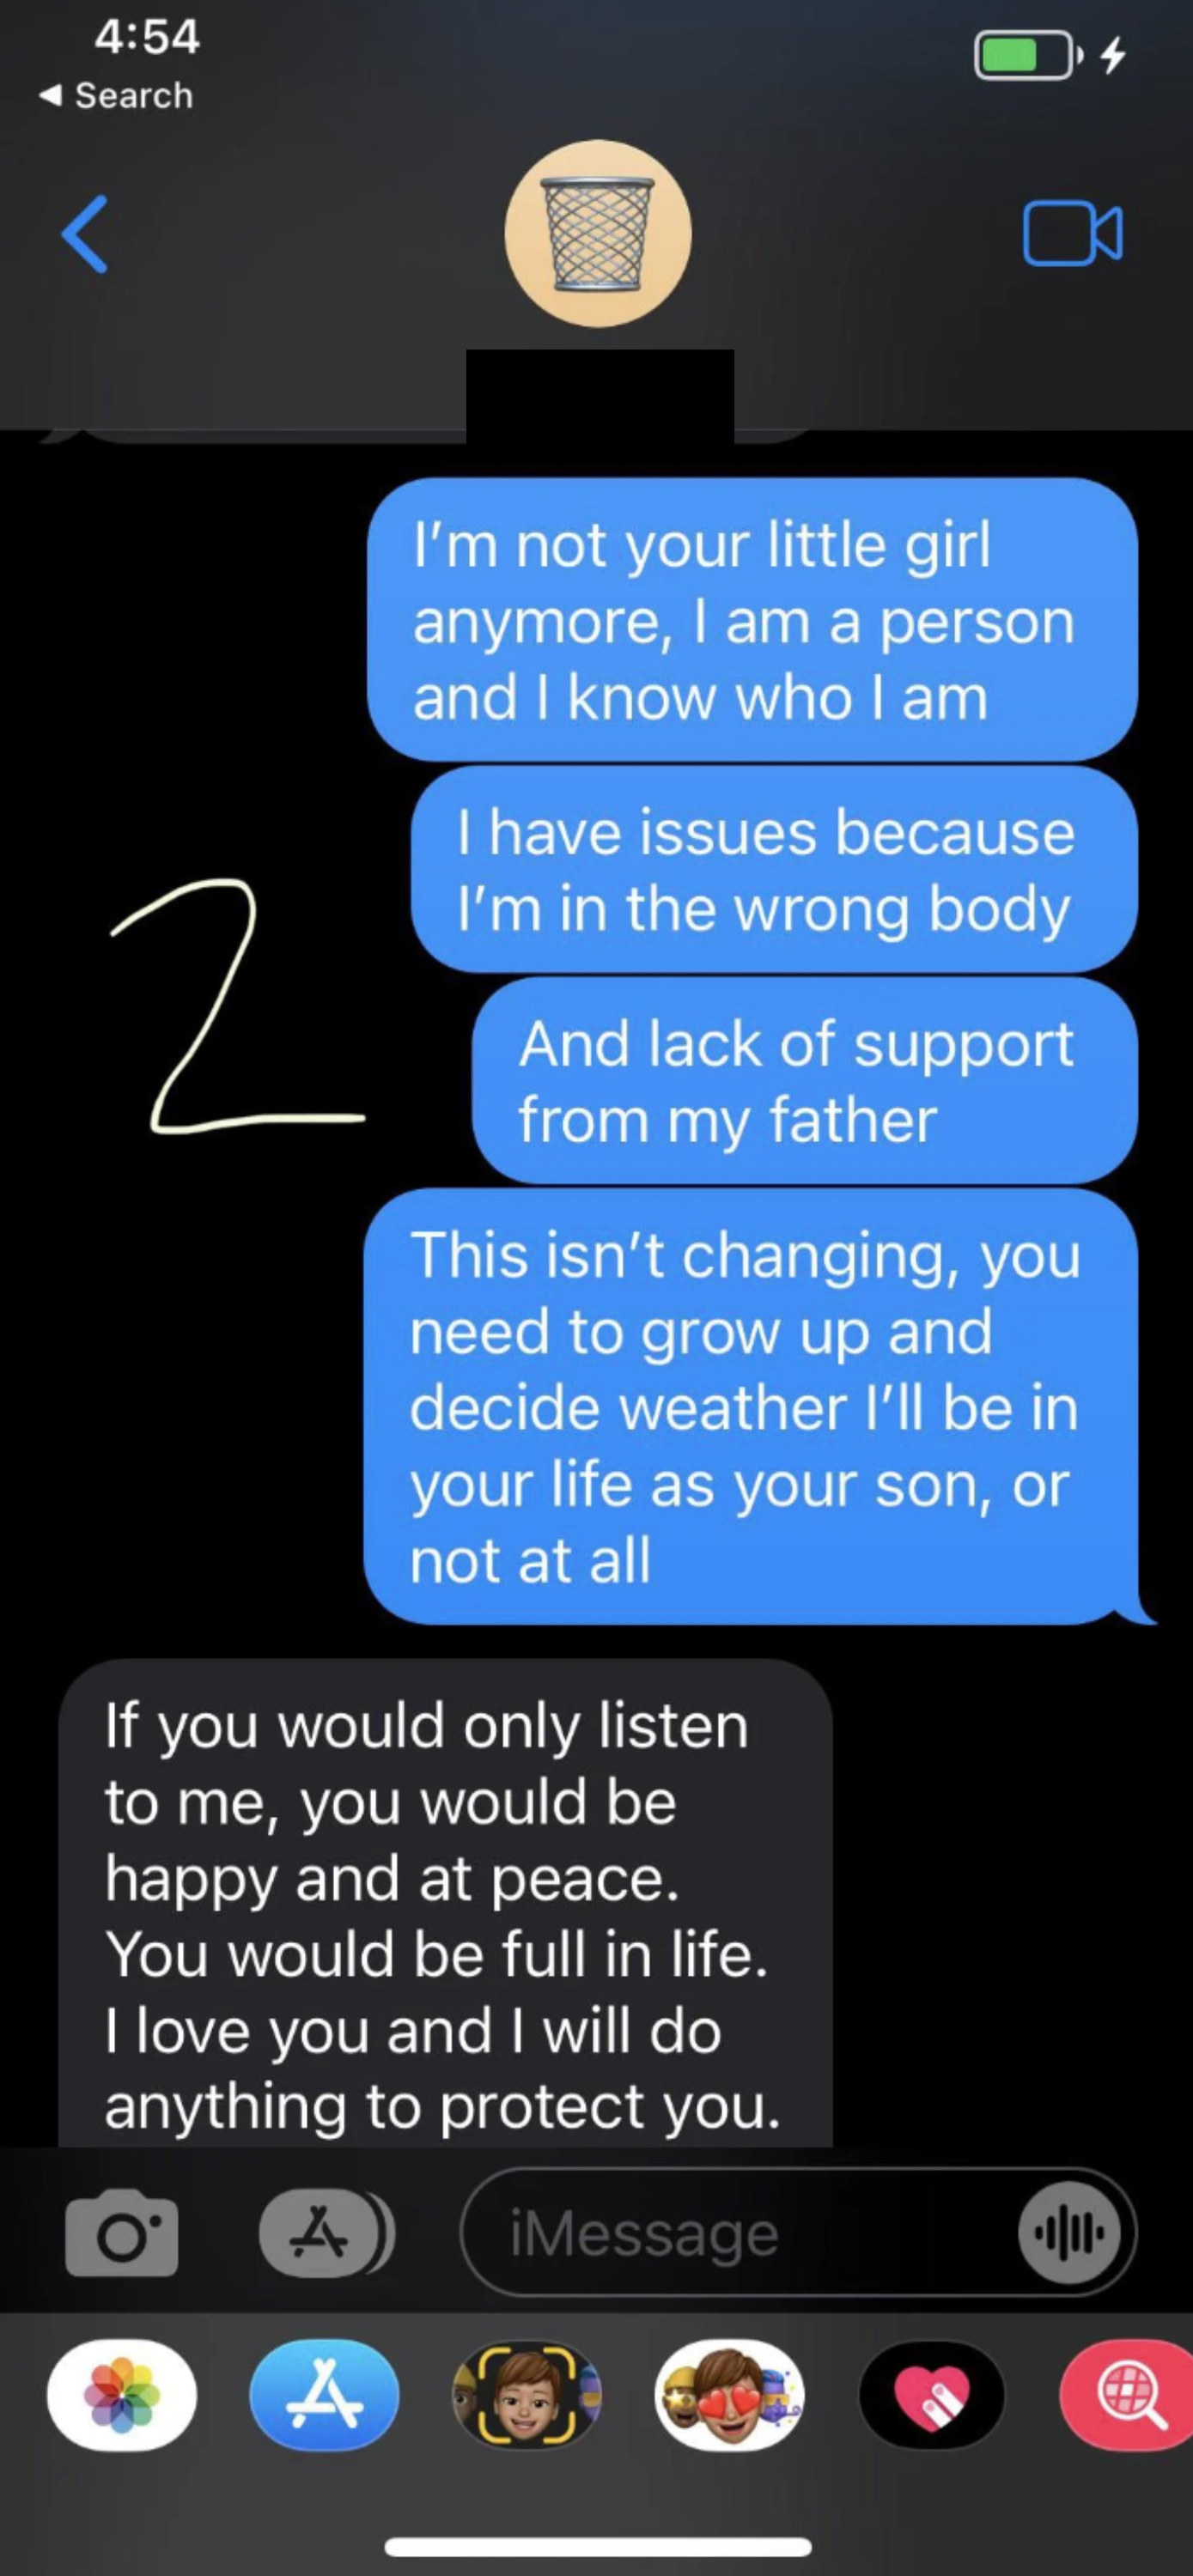 Continuation of conversation, with child saying they have issues because they&#x27;re in the wrong body and don&#x27;t have their father&#x27;s support, and father saying if they&#x27;d listen to him, they&#x27;d be happy and at peace